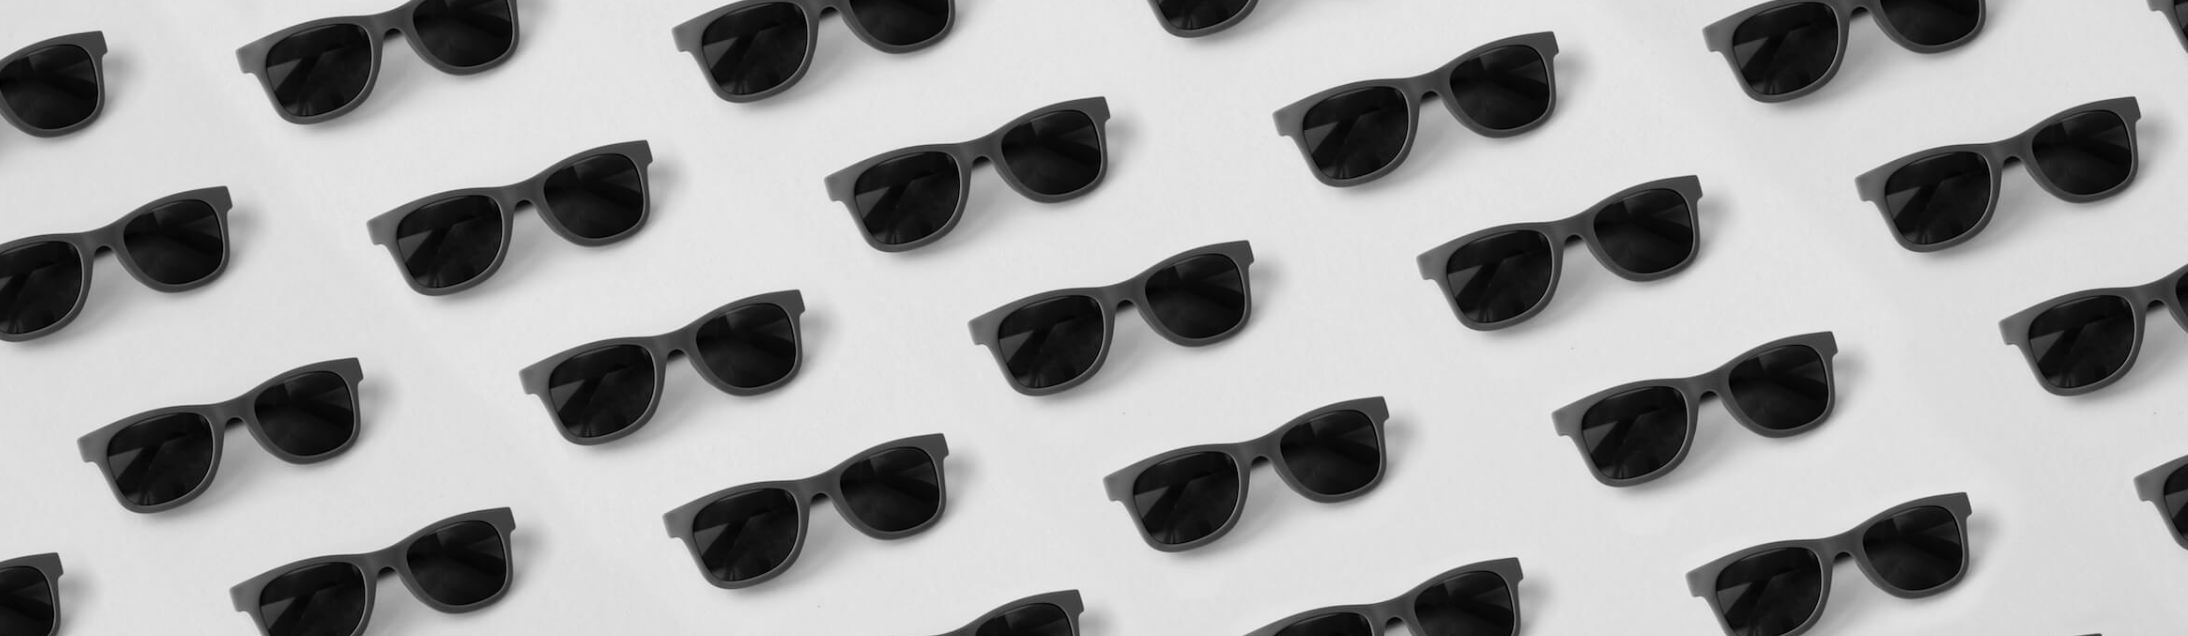 rows of exactly the same sunglasses